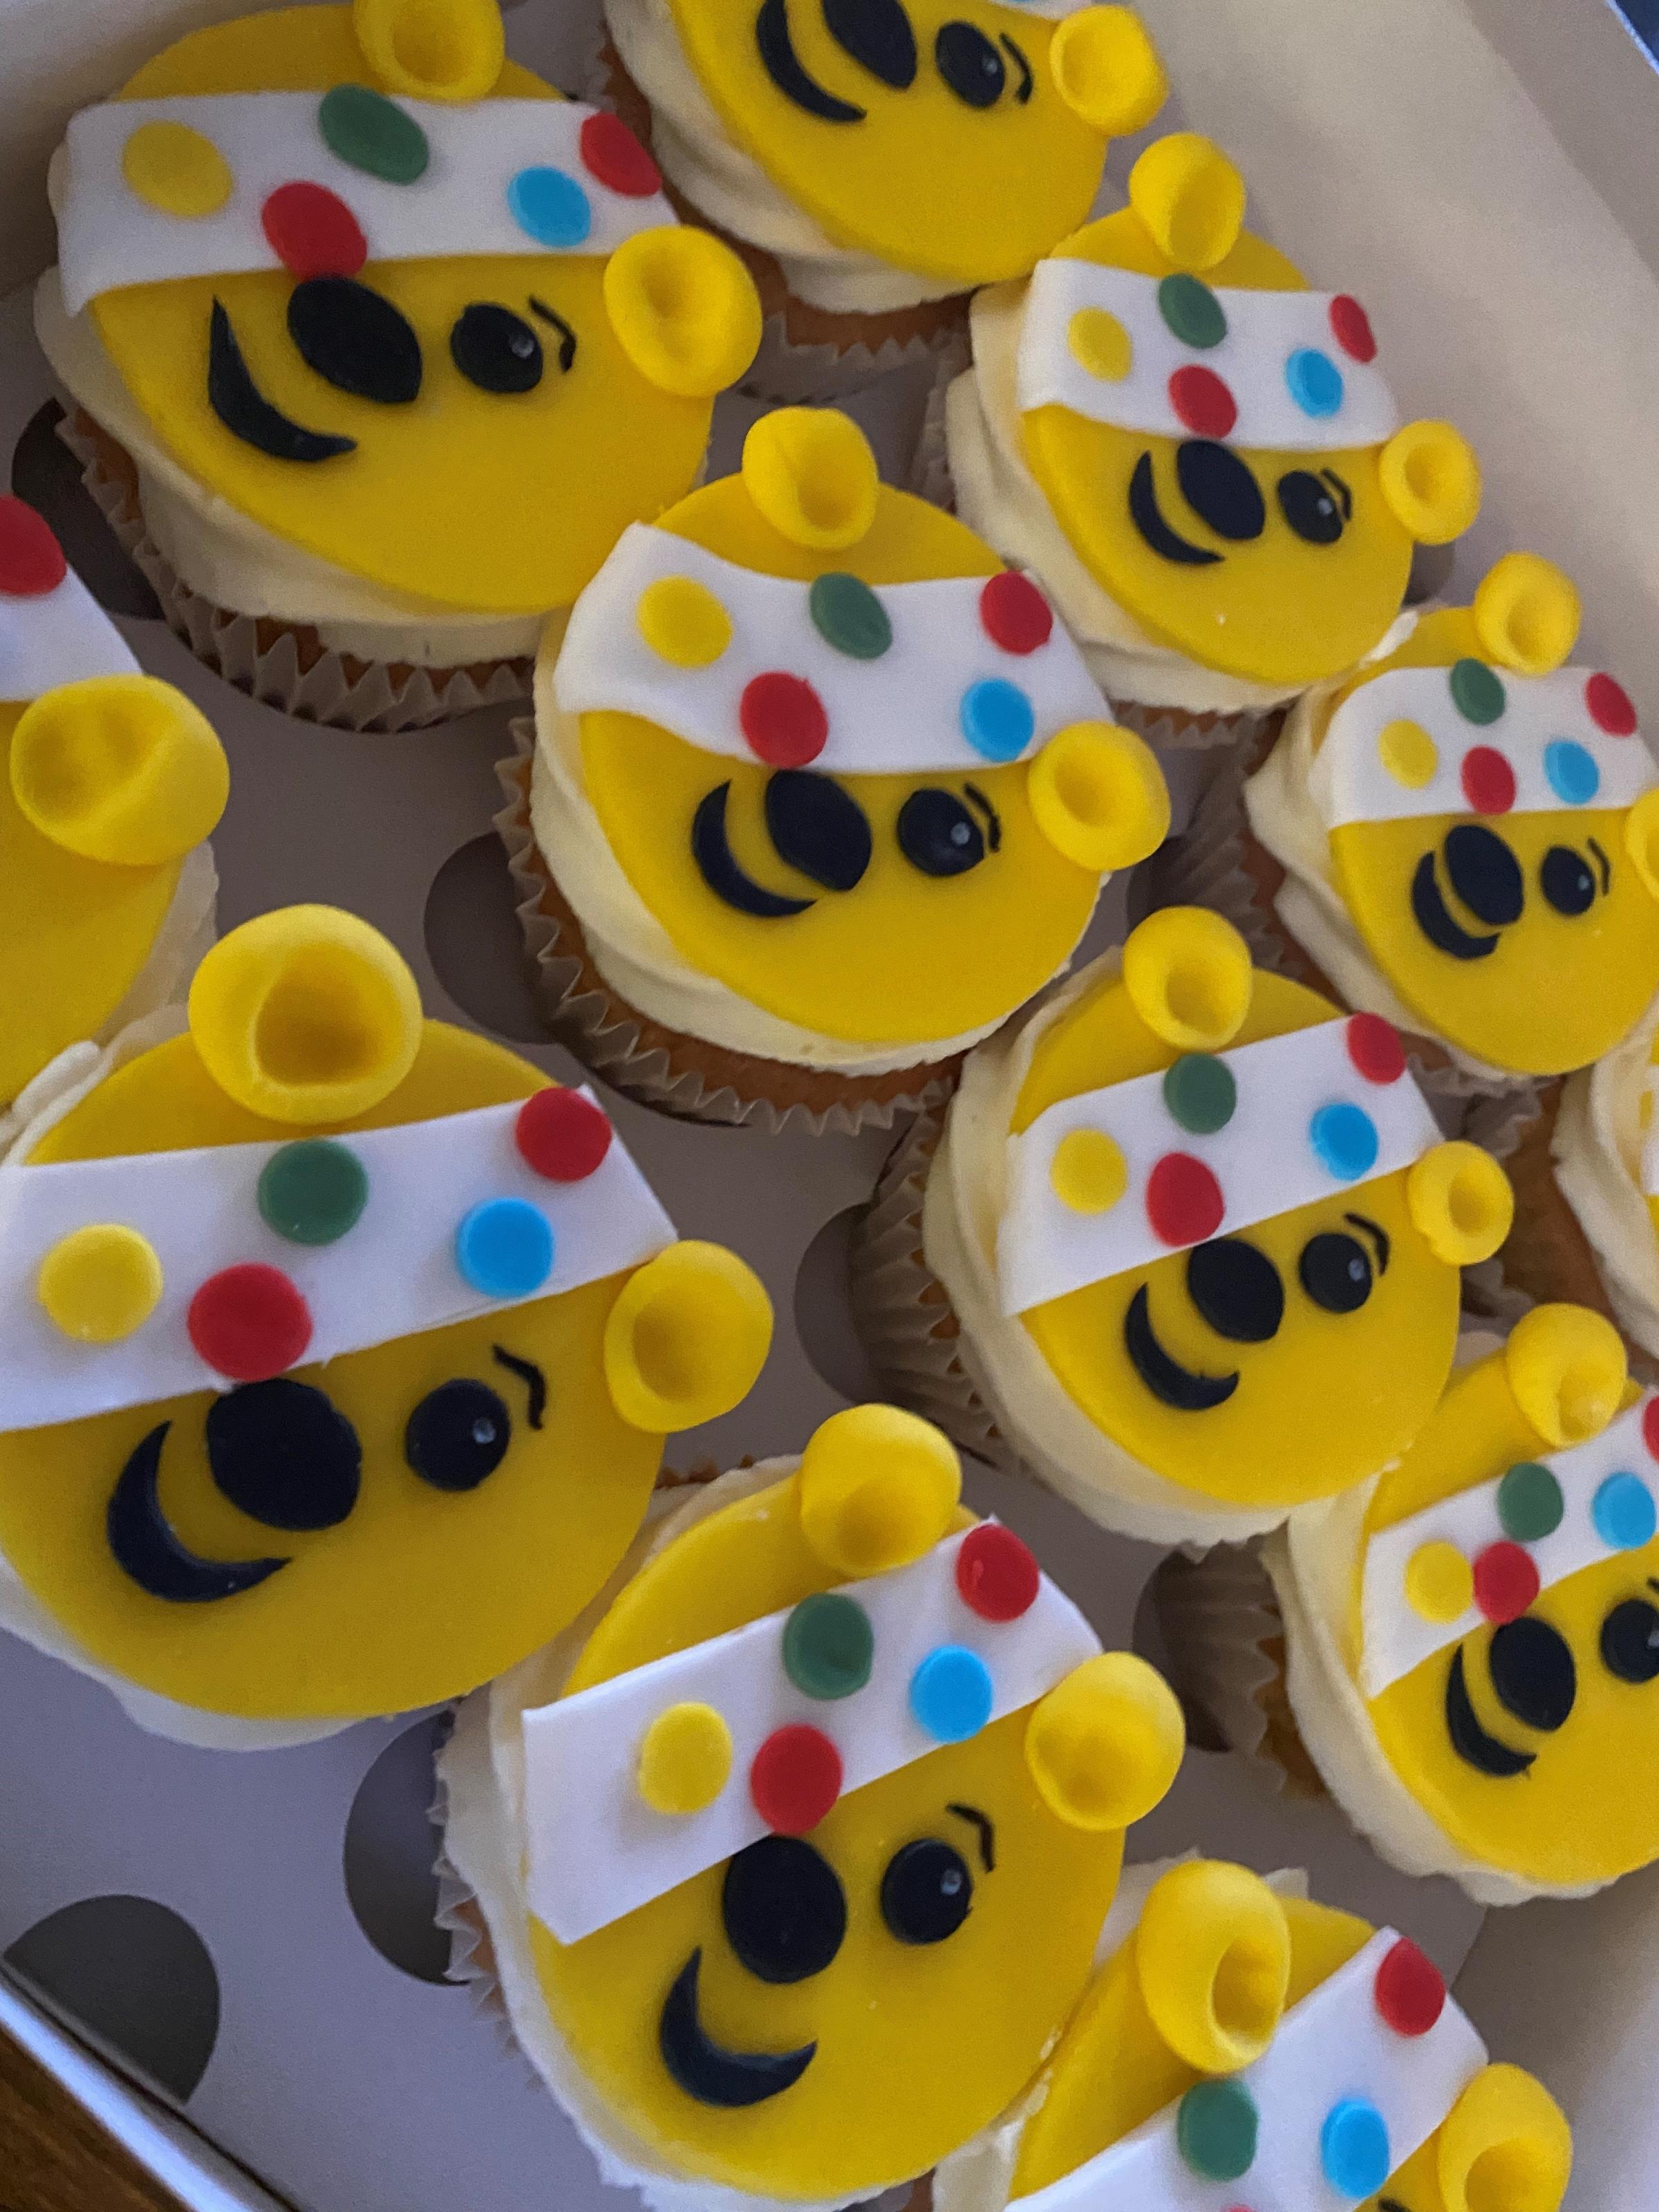 There was a bake sale to raise money for Children in Need